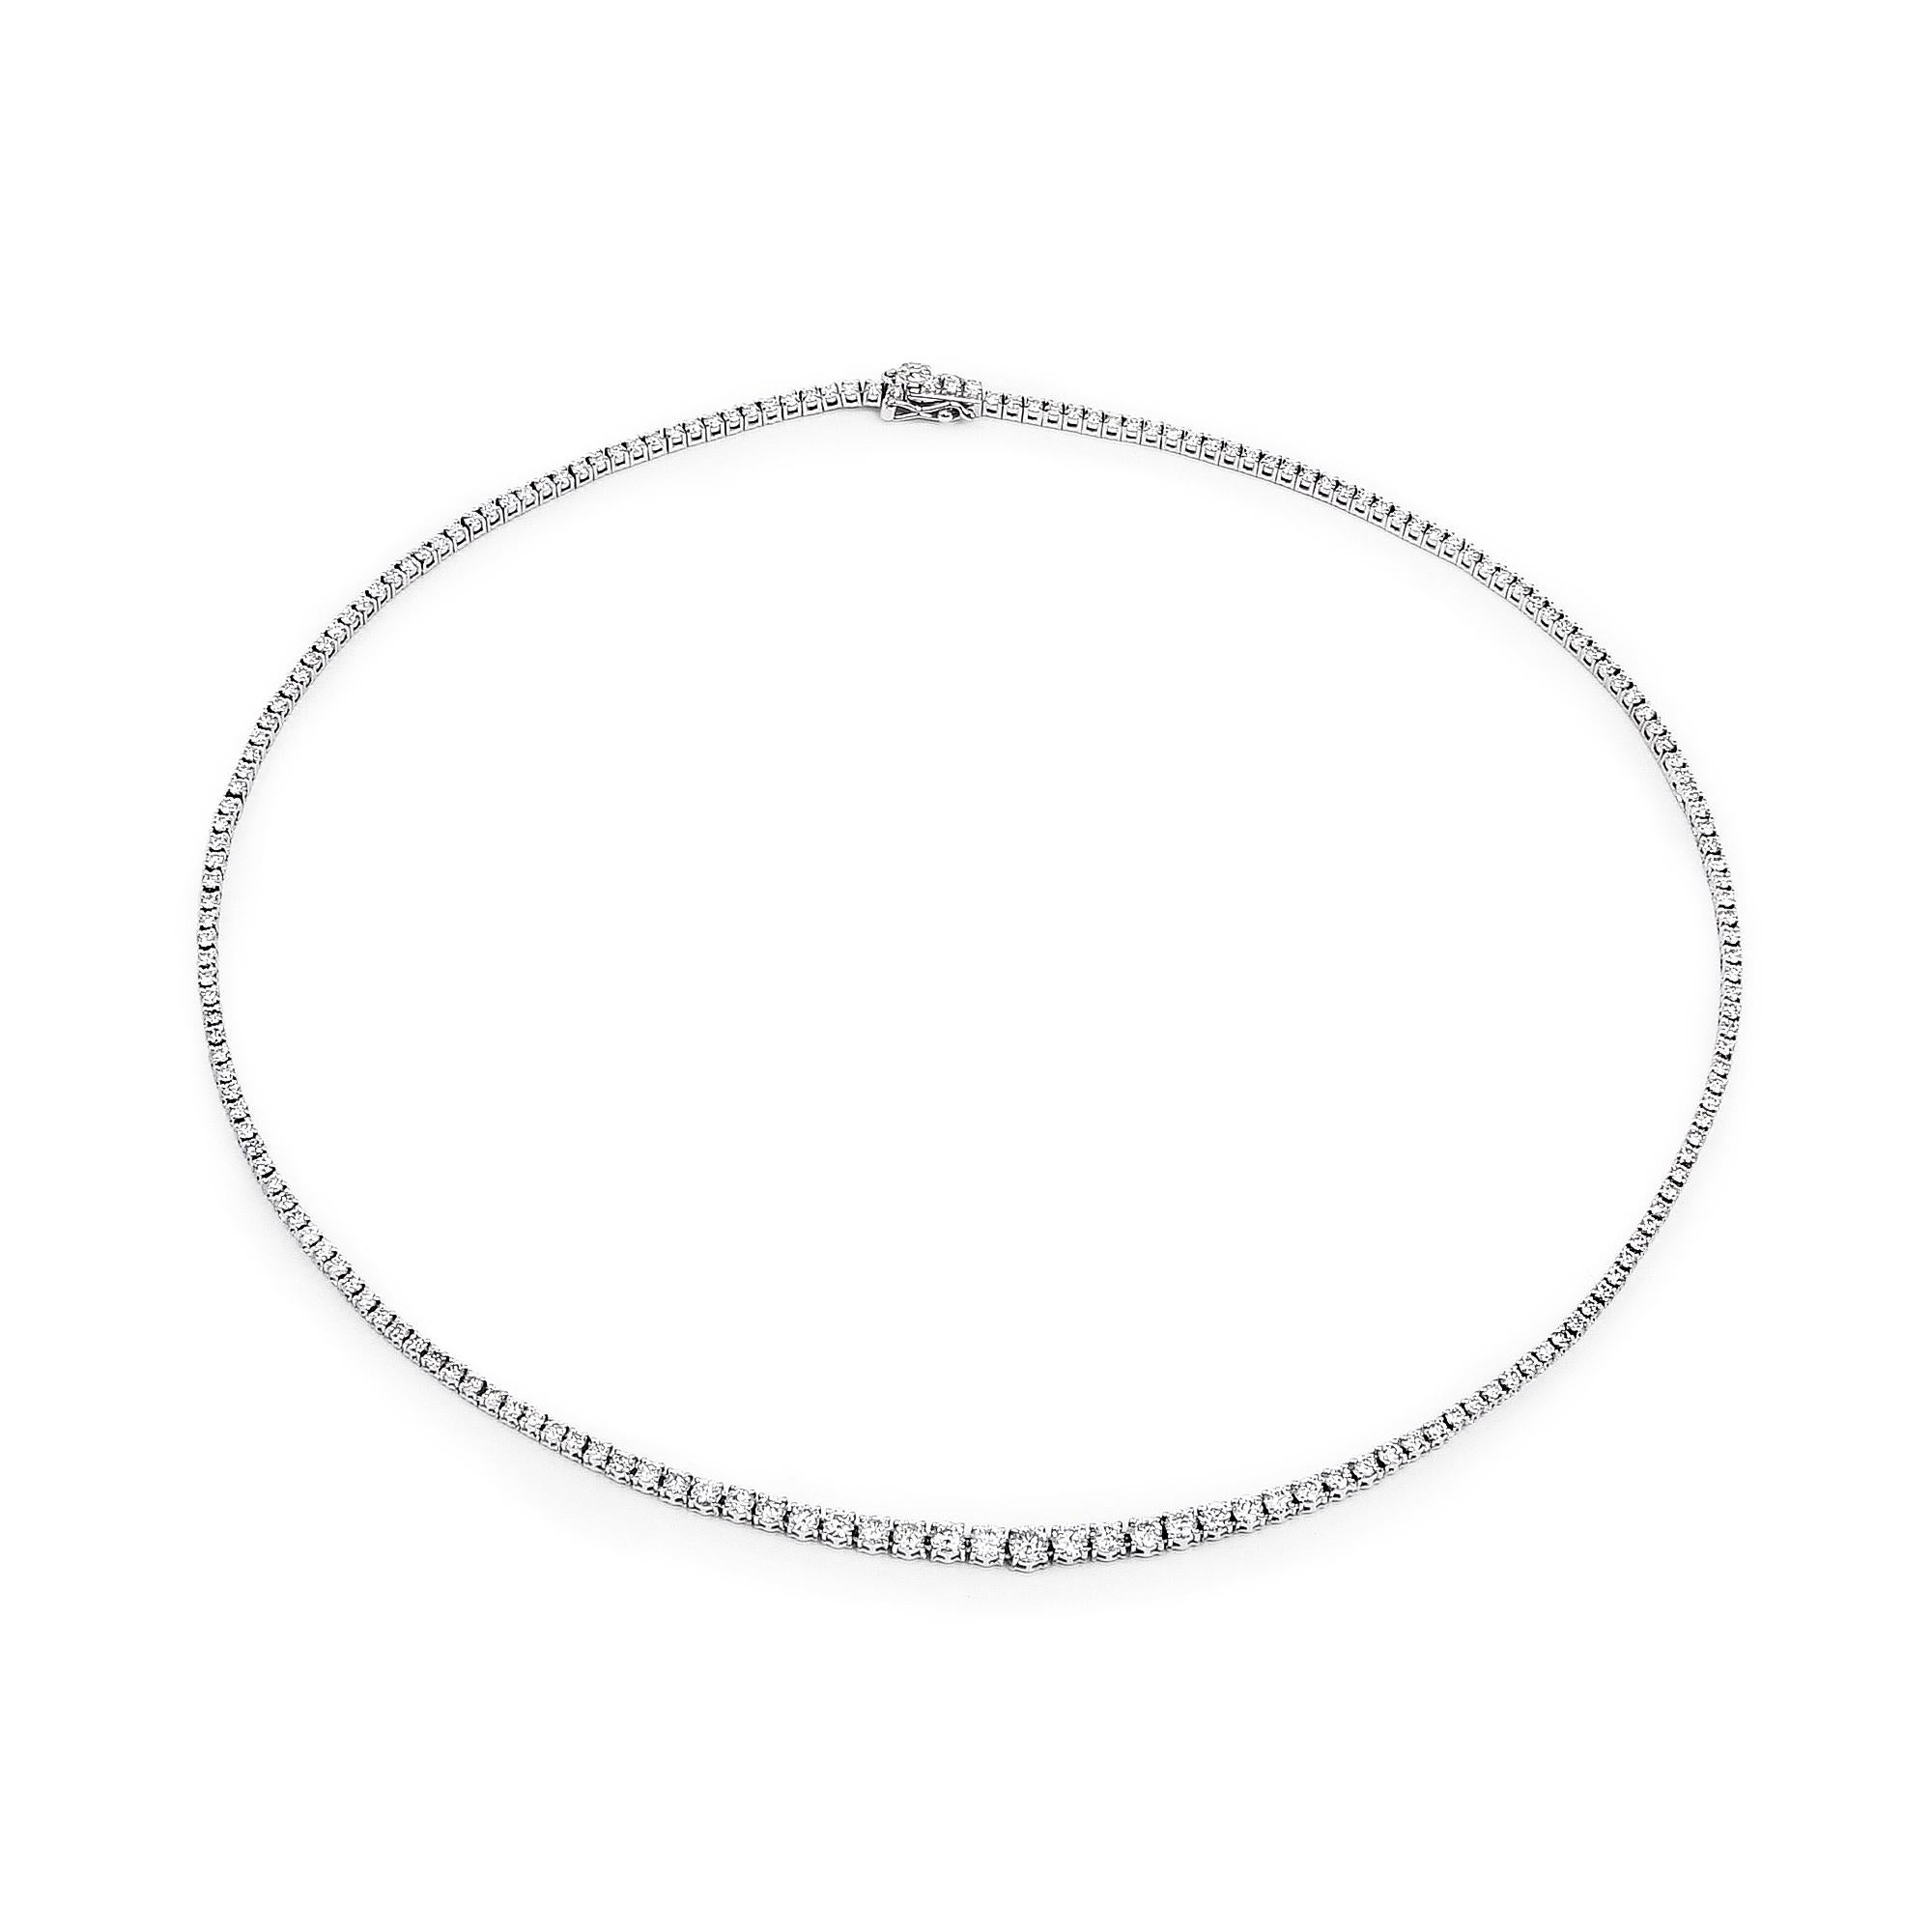 Flaunt yourself with these white diamond gold necklace. The natural diamonds have a combined weight of 6.30 carats and are set in 14K white gold. The white hue of these necklace adds a pop of color to any look! The understated design and vibrant